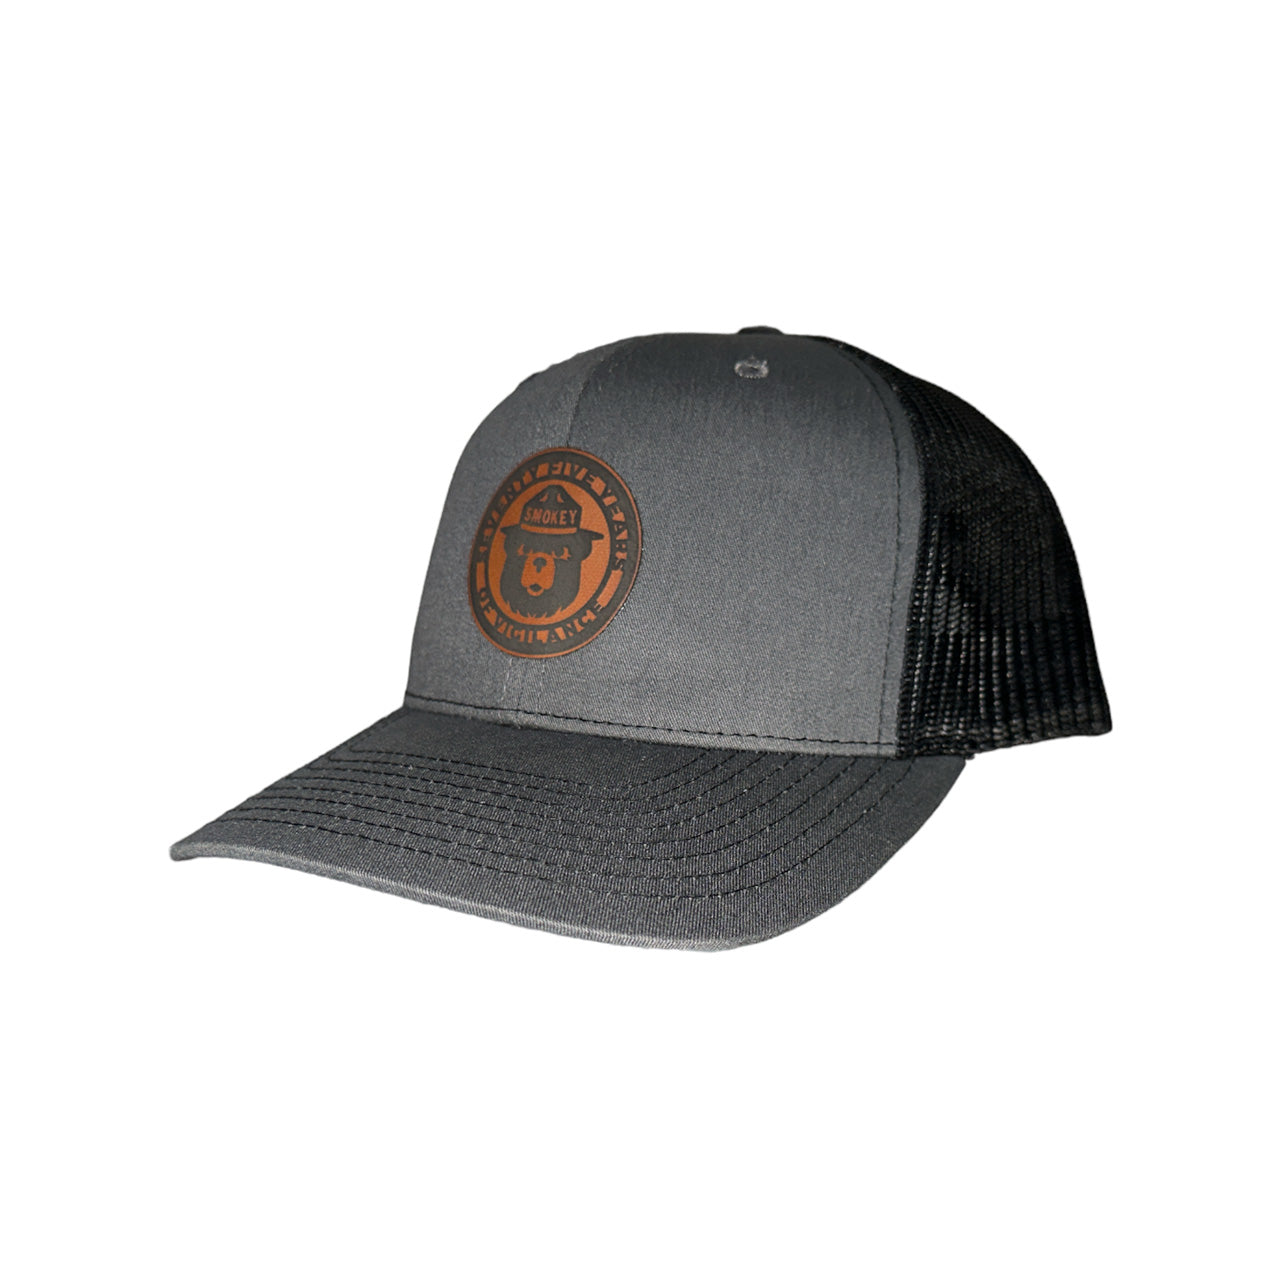 My Montana Roots Hats | WYR Clothing